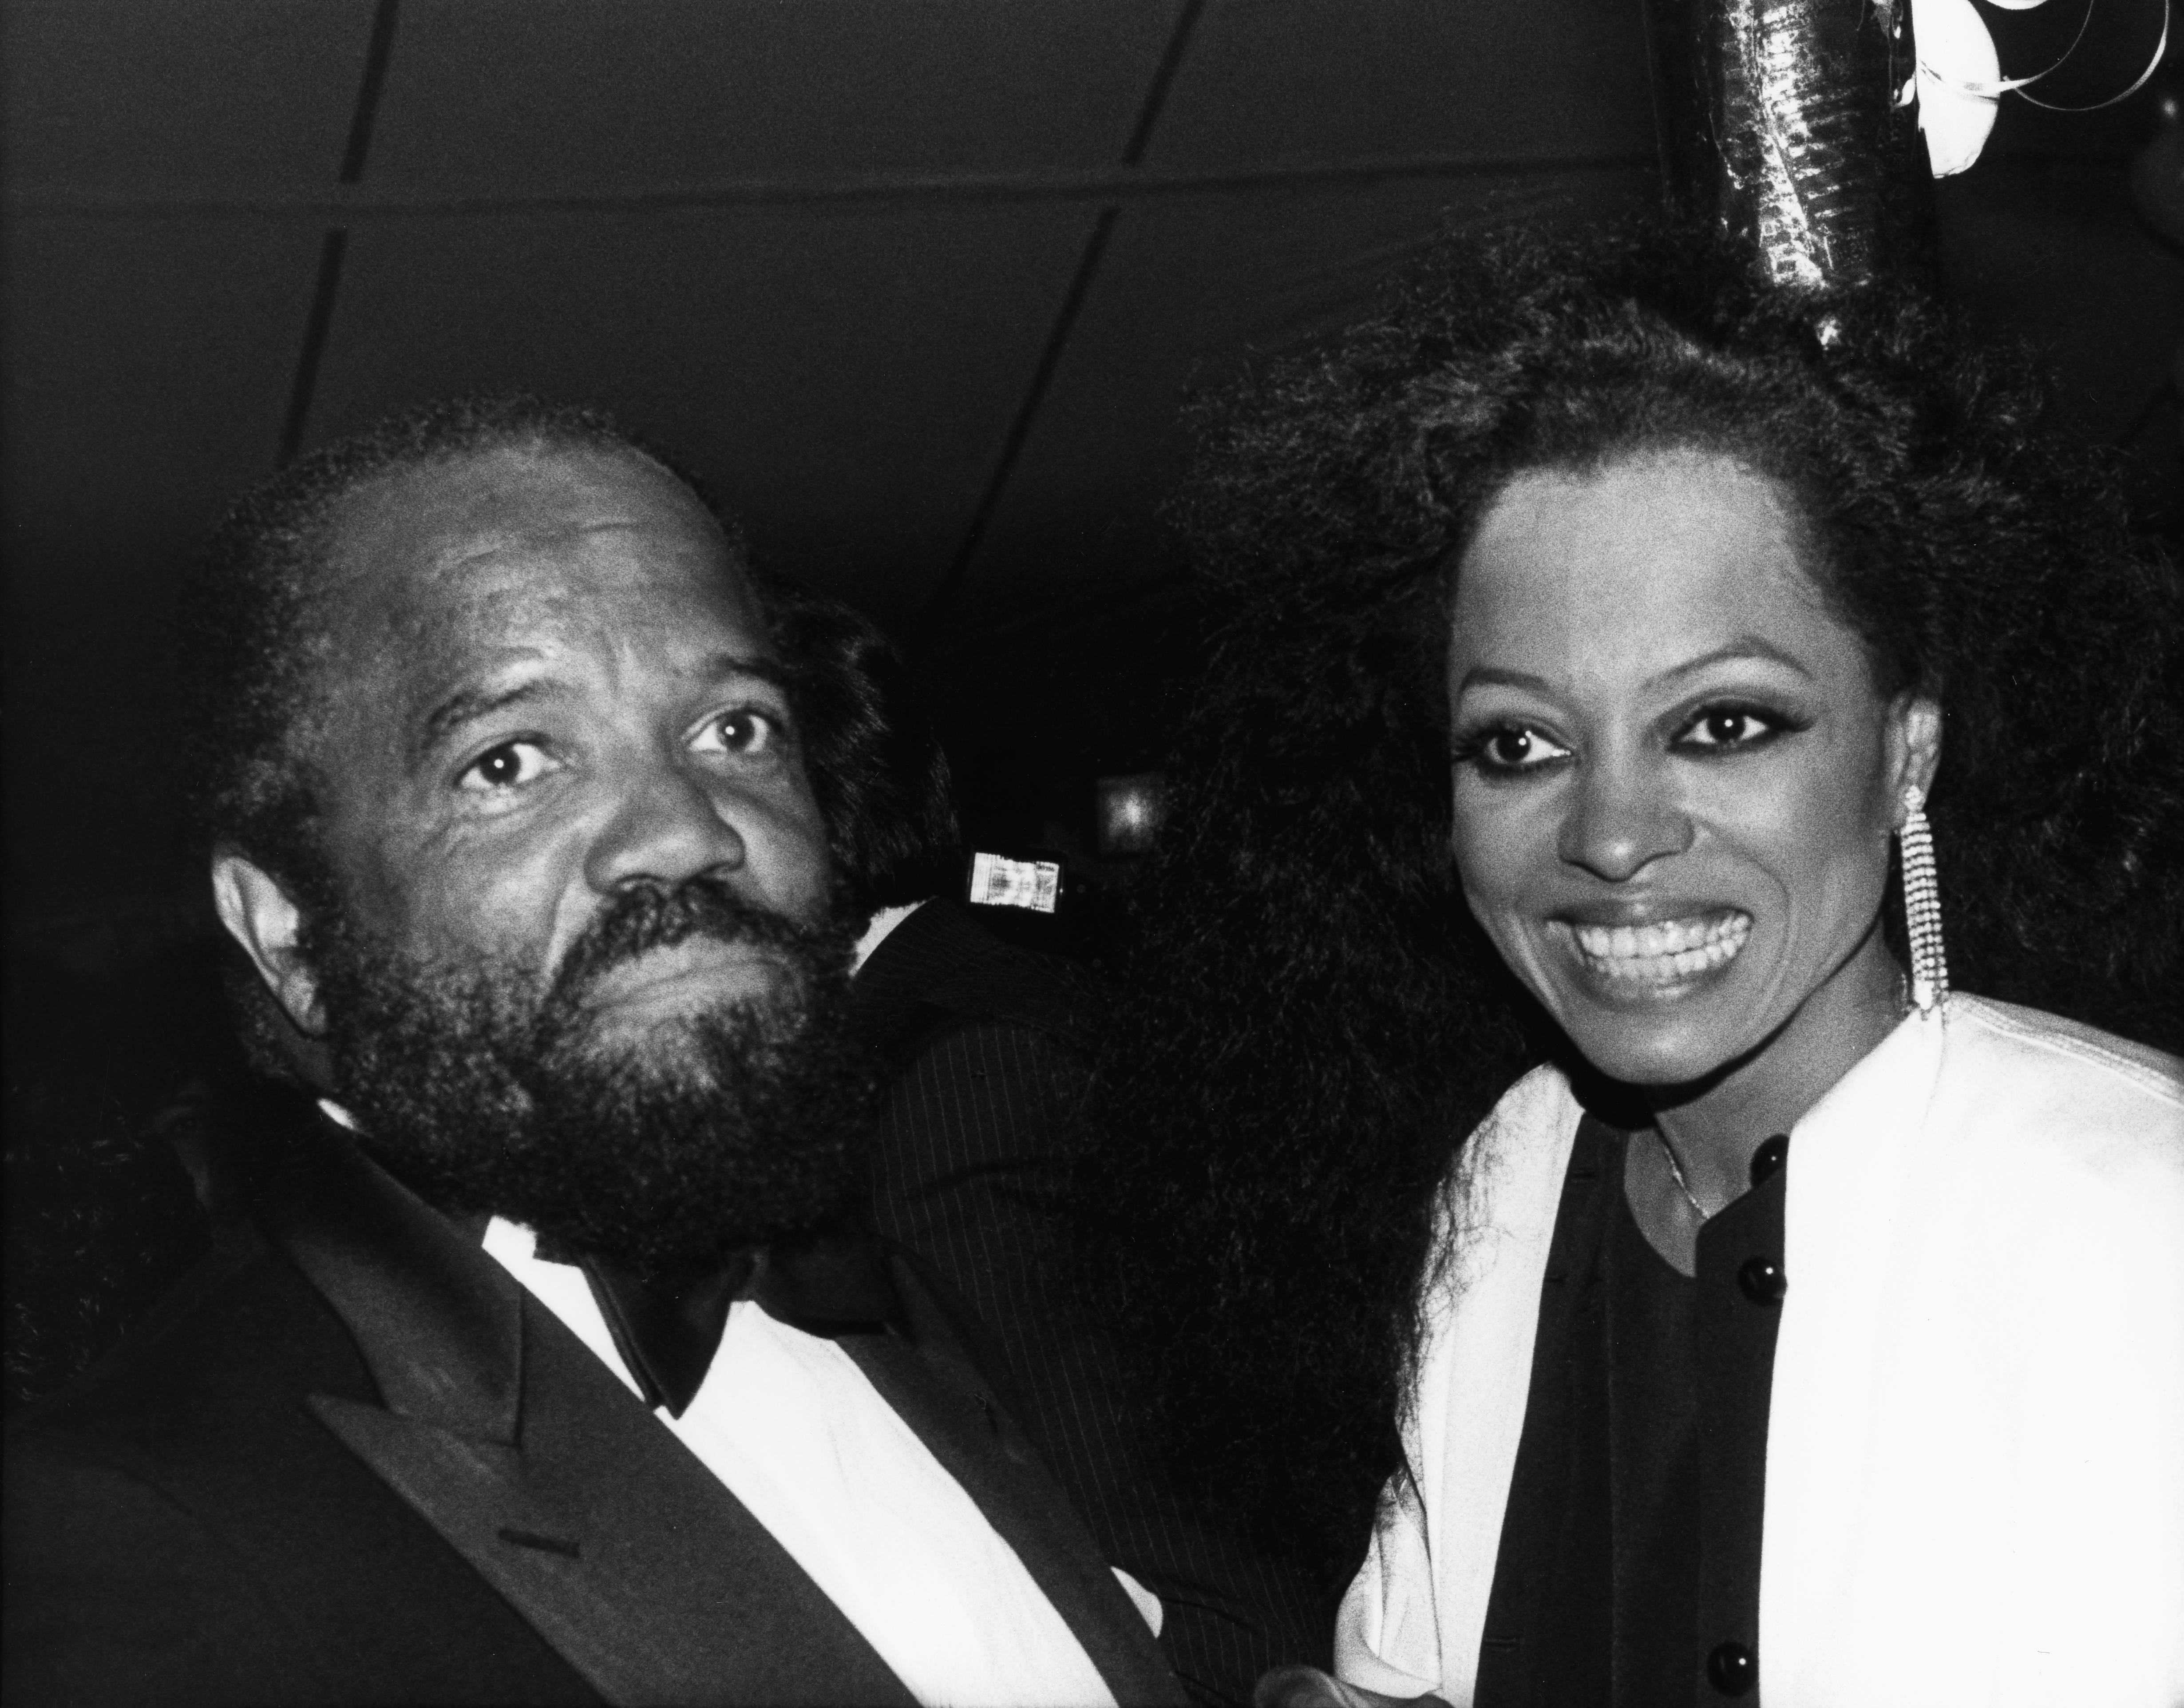 Diana Ross and Berry Gordy smiling in a black-and-white photo at an event.